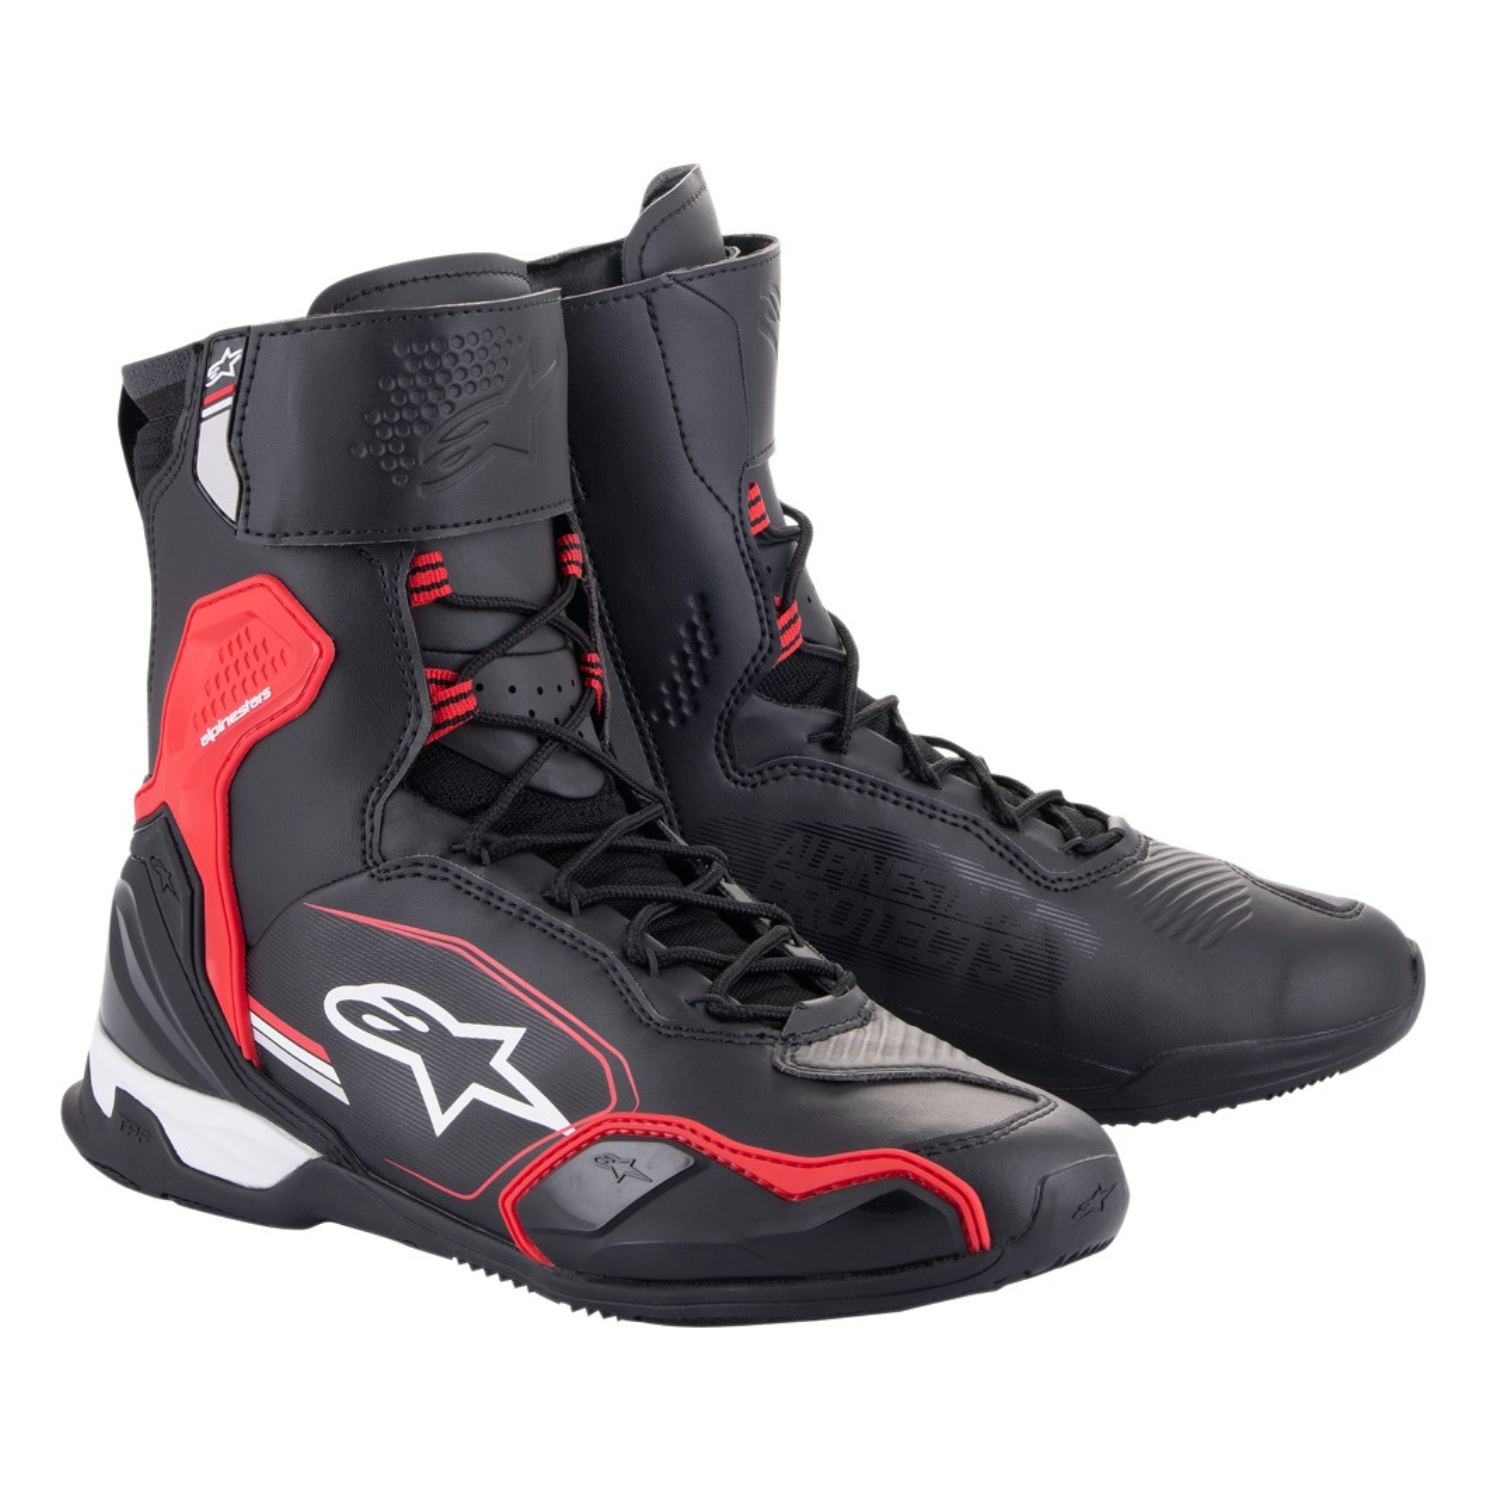 Image of Alpinestars Superfaster Shoes Black Bright Red White Talla US 12